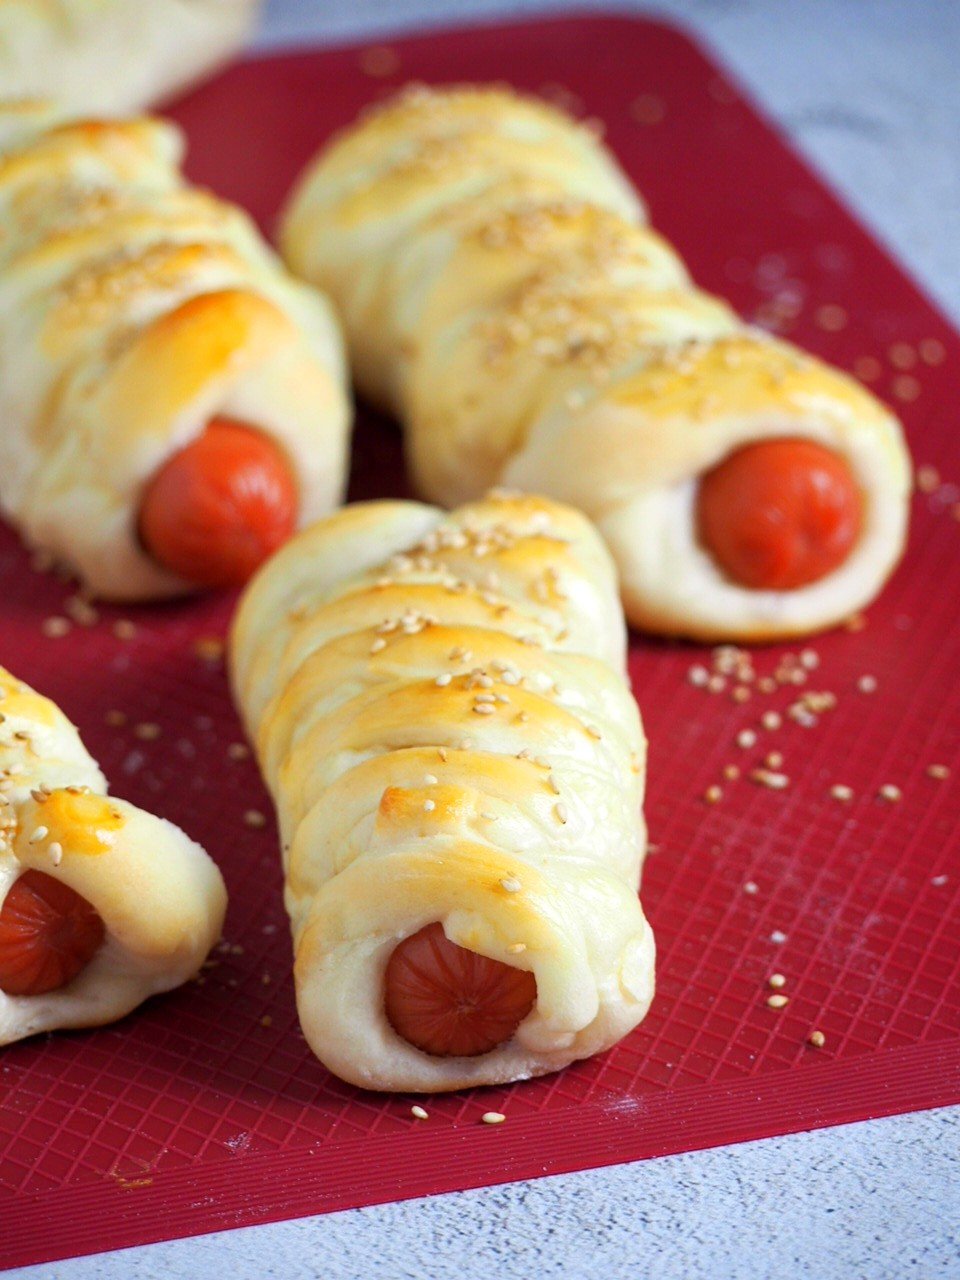 Braided hotdog buns on a red silicone mat.